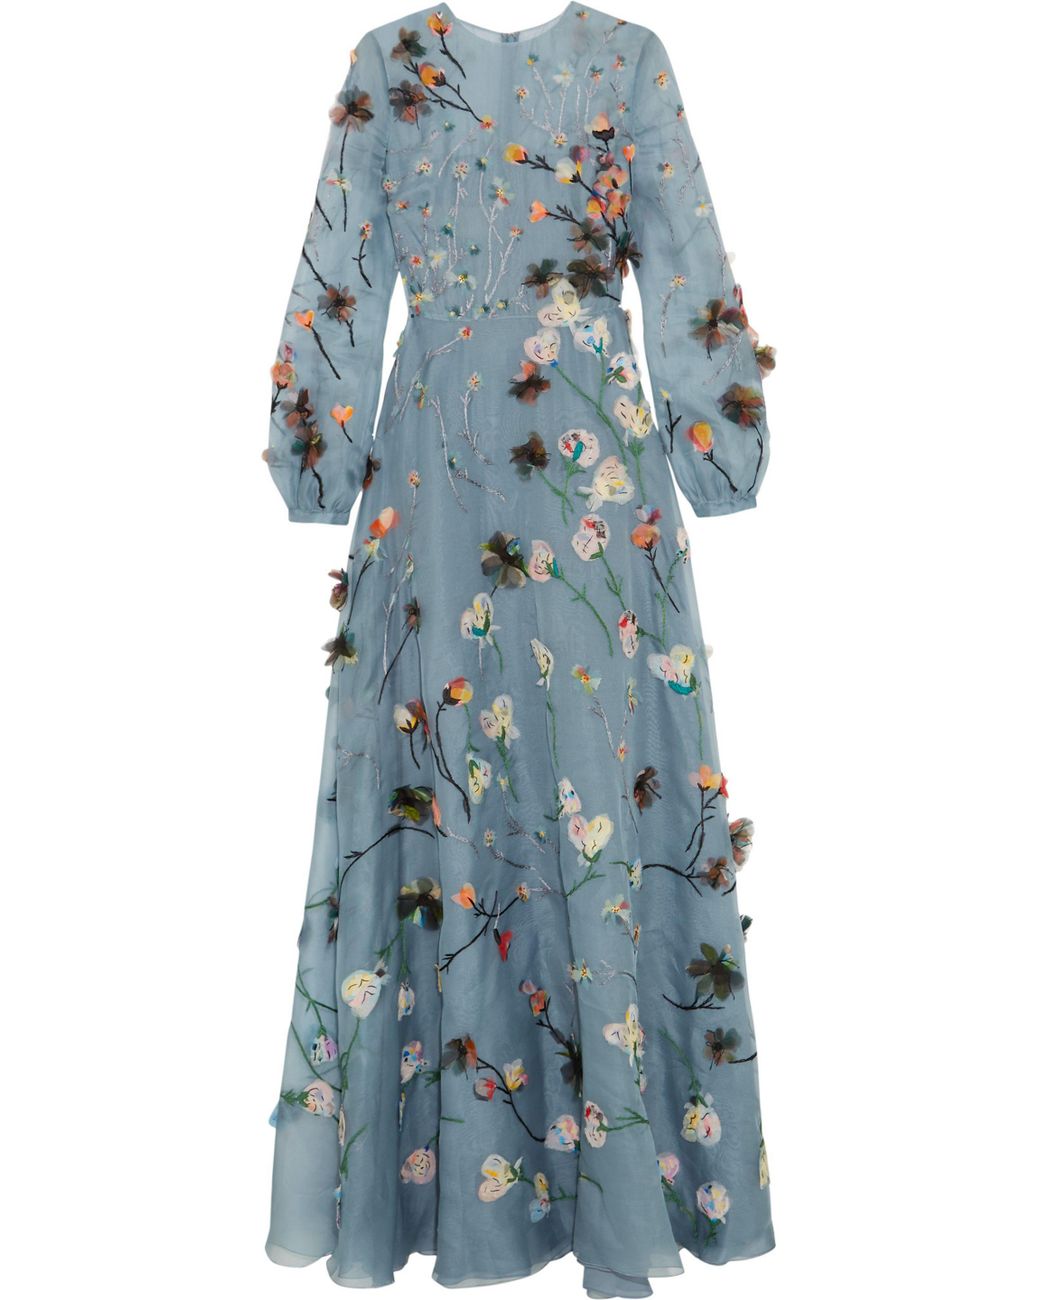 Valentino Floral Applique Evening Dress in Blue | Lyst